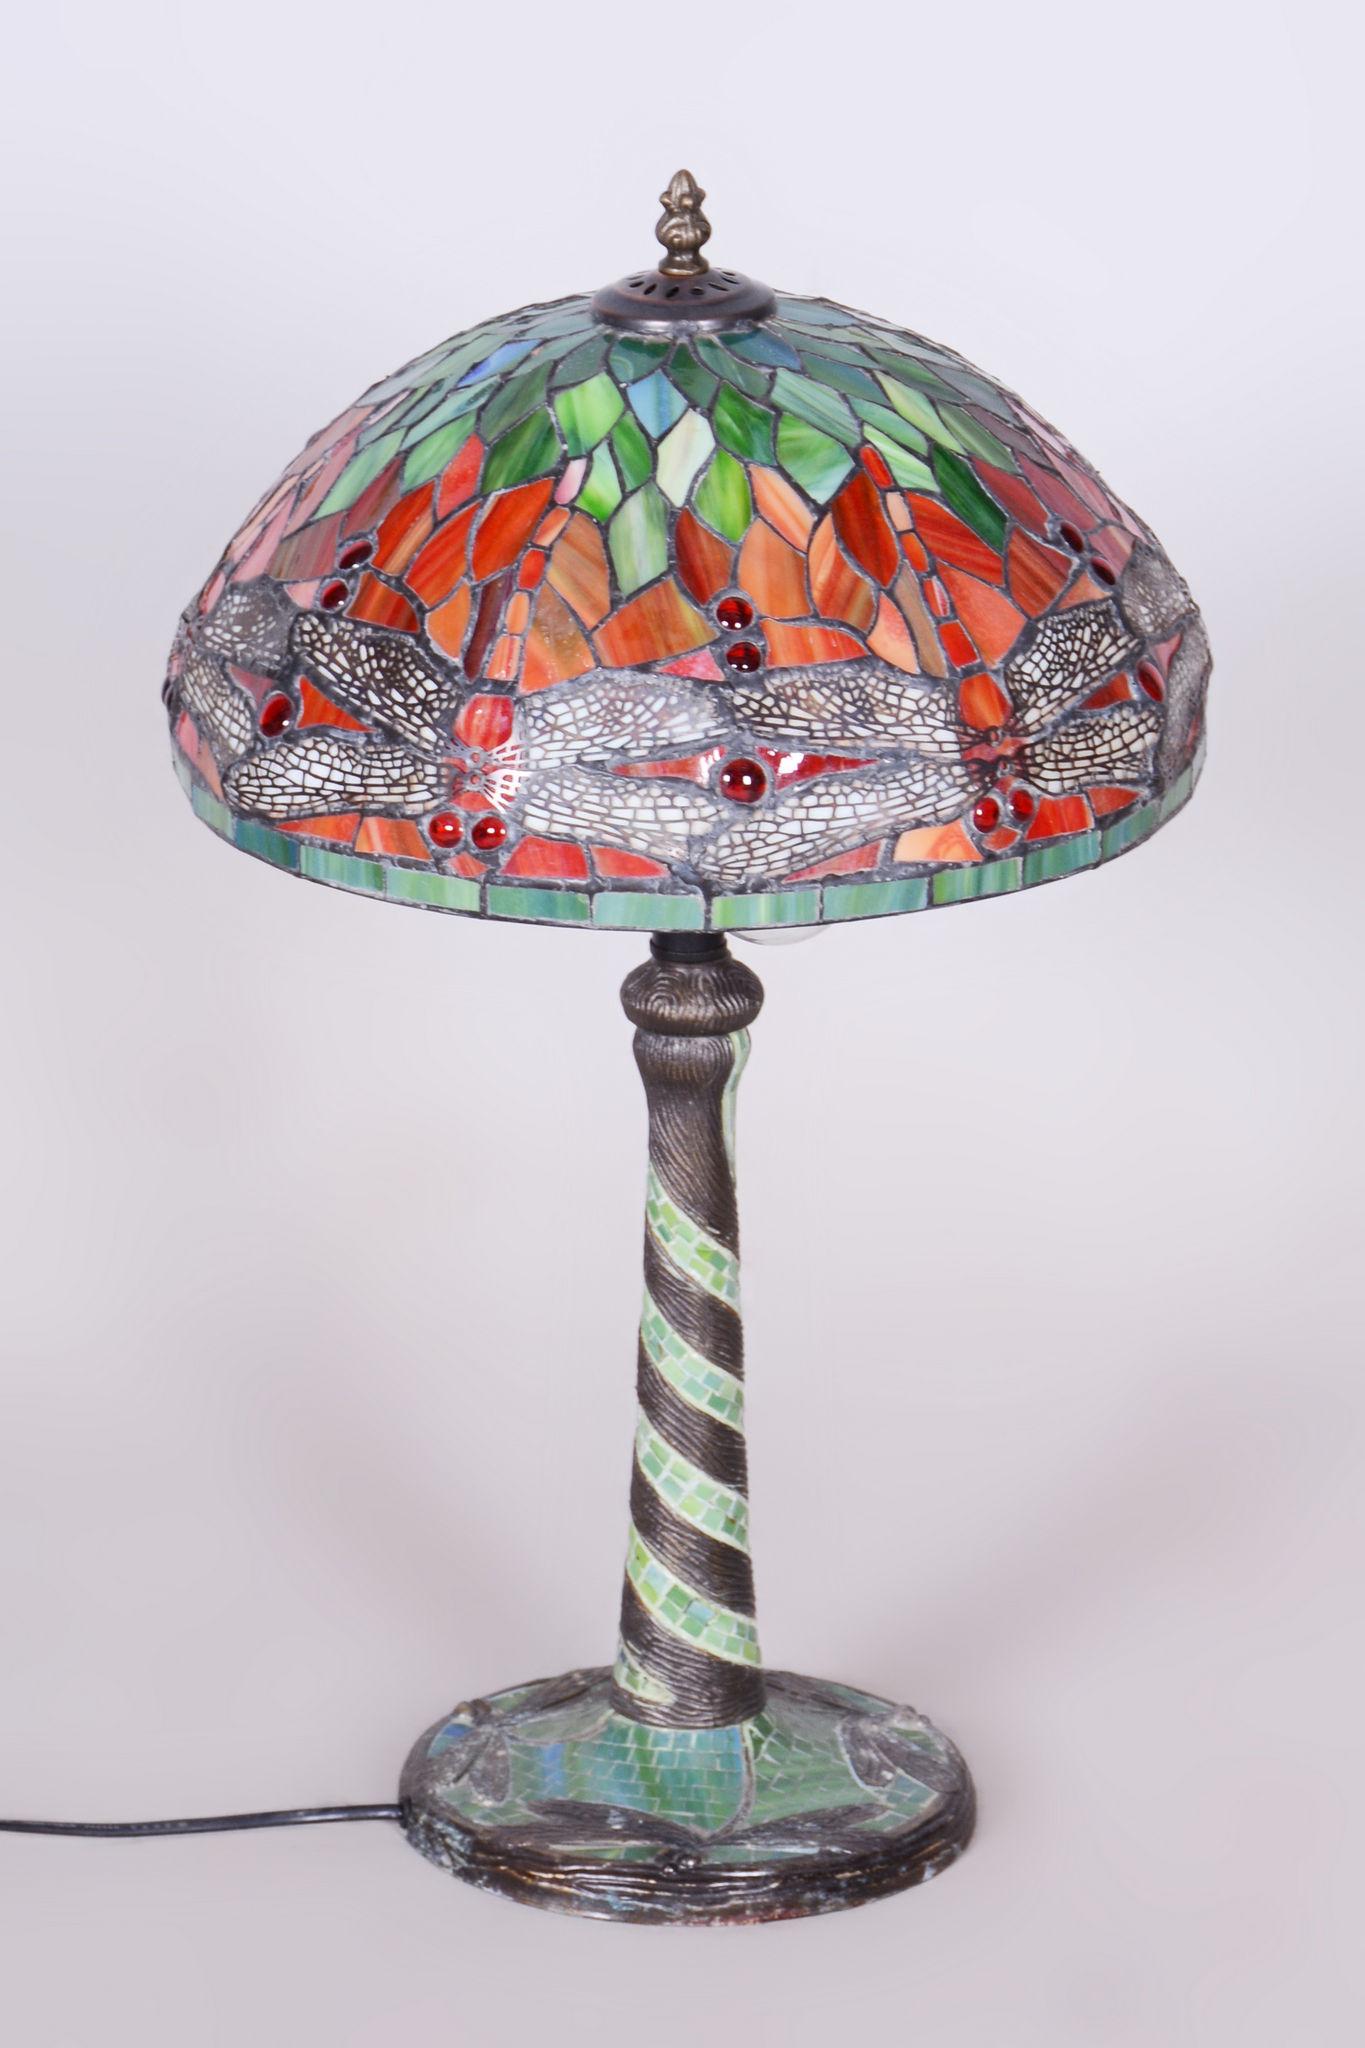 Original Art Deco table lamp. 

Fully functional electrification.

Material: Chrome-plated Steel
Source: France
Period: 1970-1979

This item features classic Art Deco elements. Art Deco is a style that originated in France in the early 20th century.